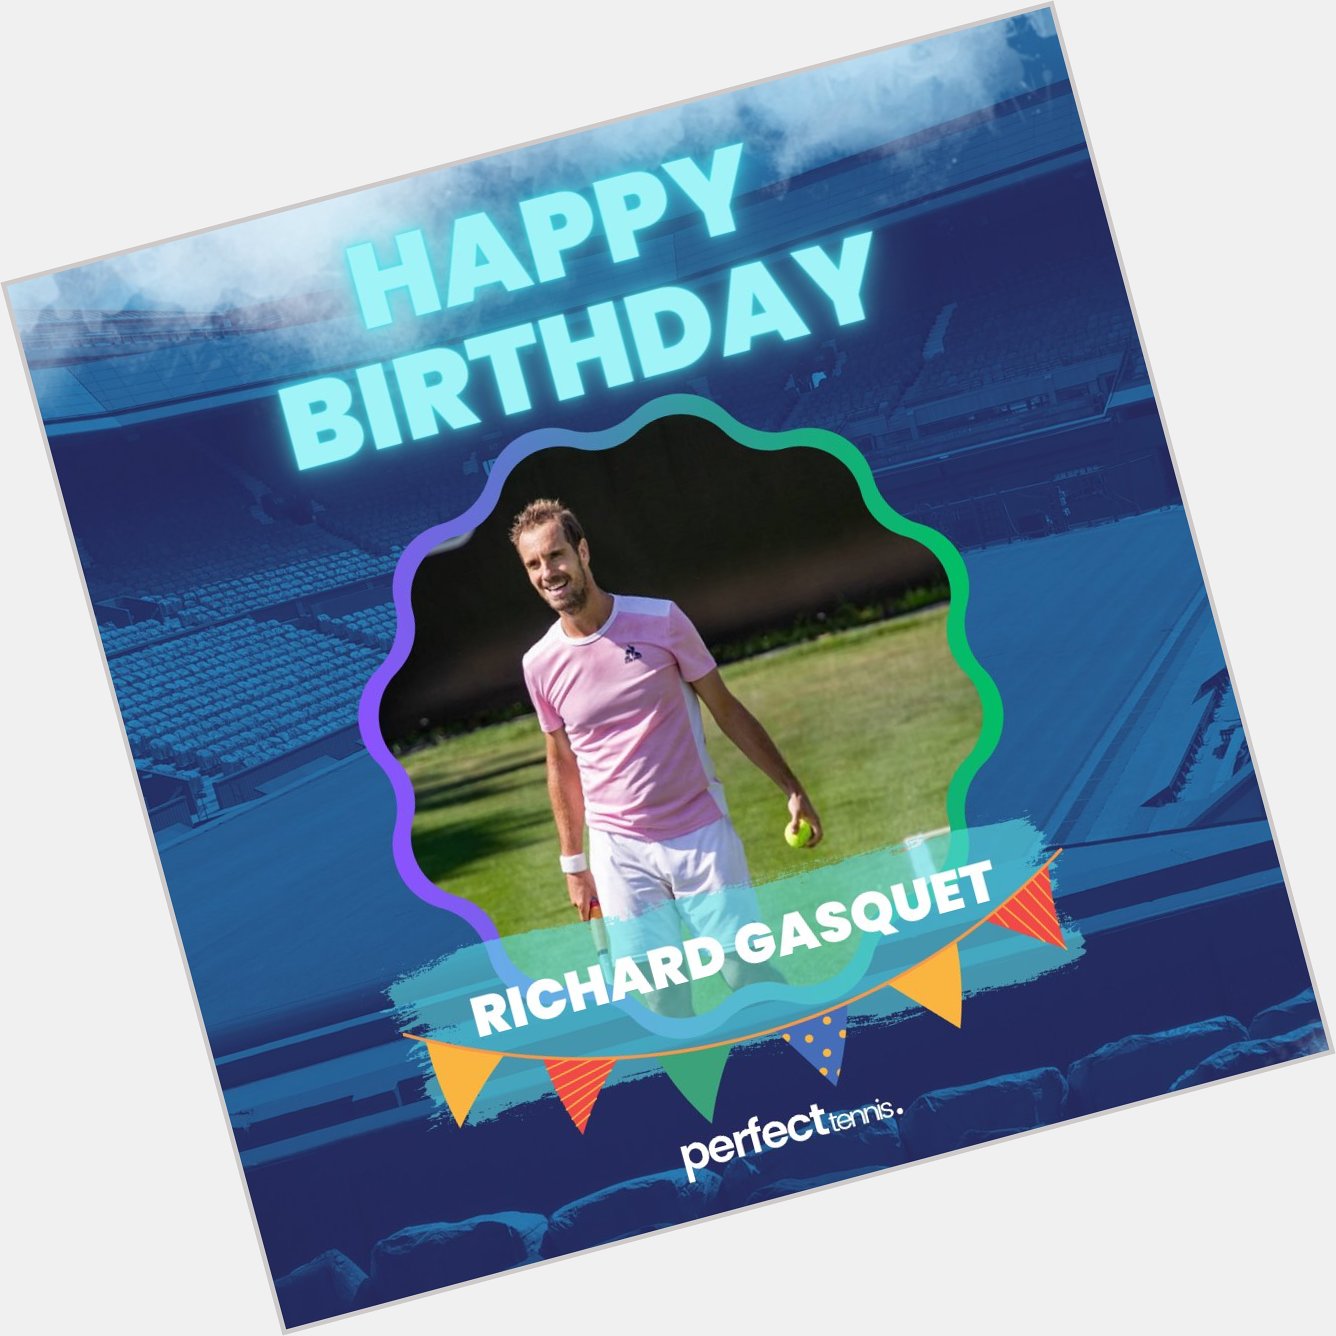  Happy 37th birthday to Richard Gasquet. 600 career match wins this week. 